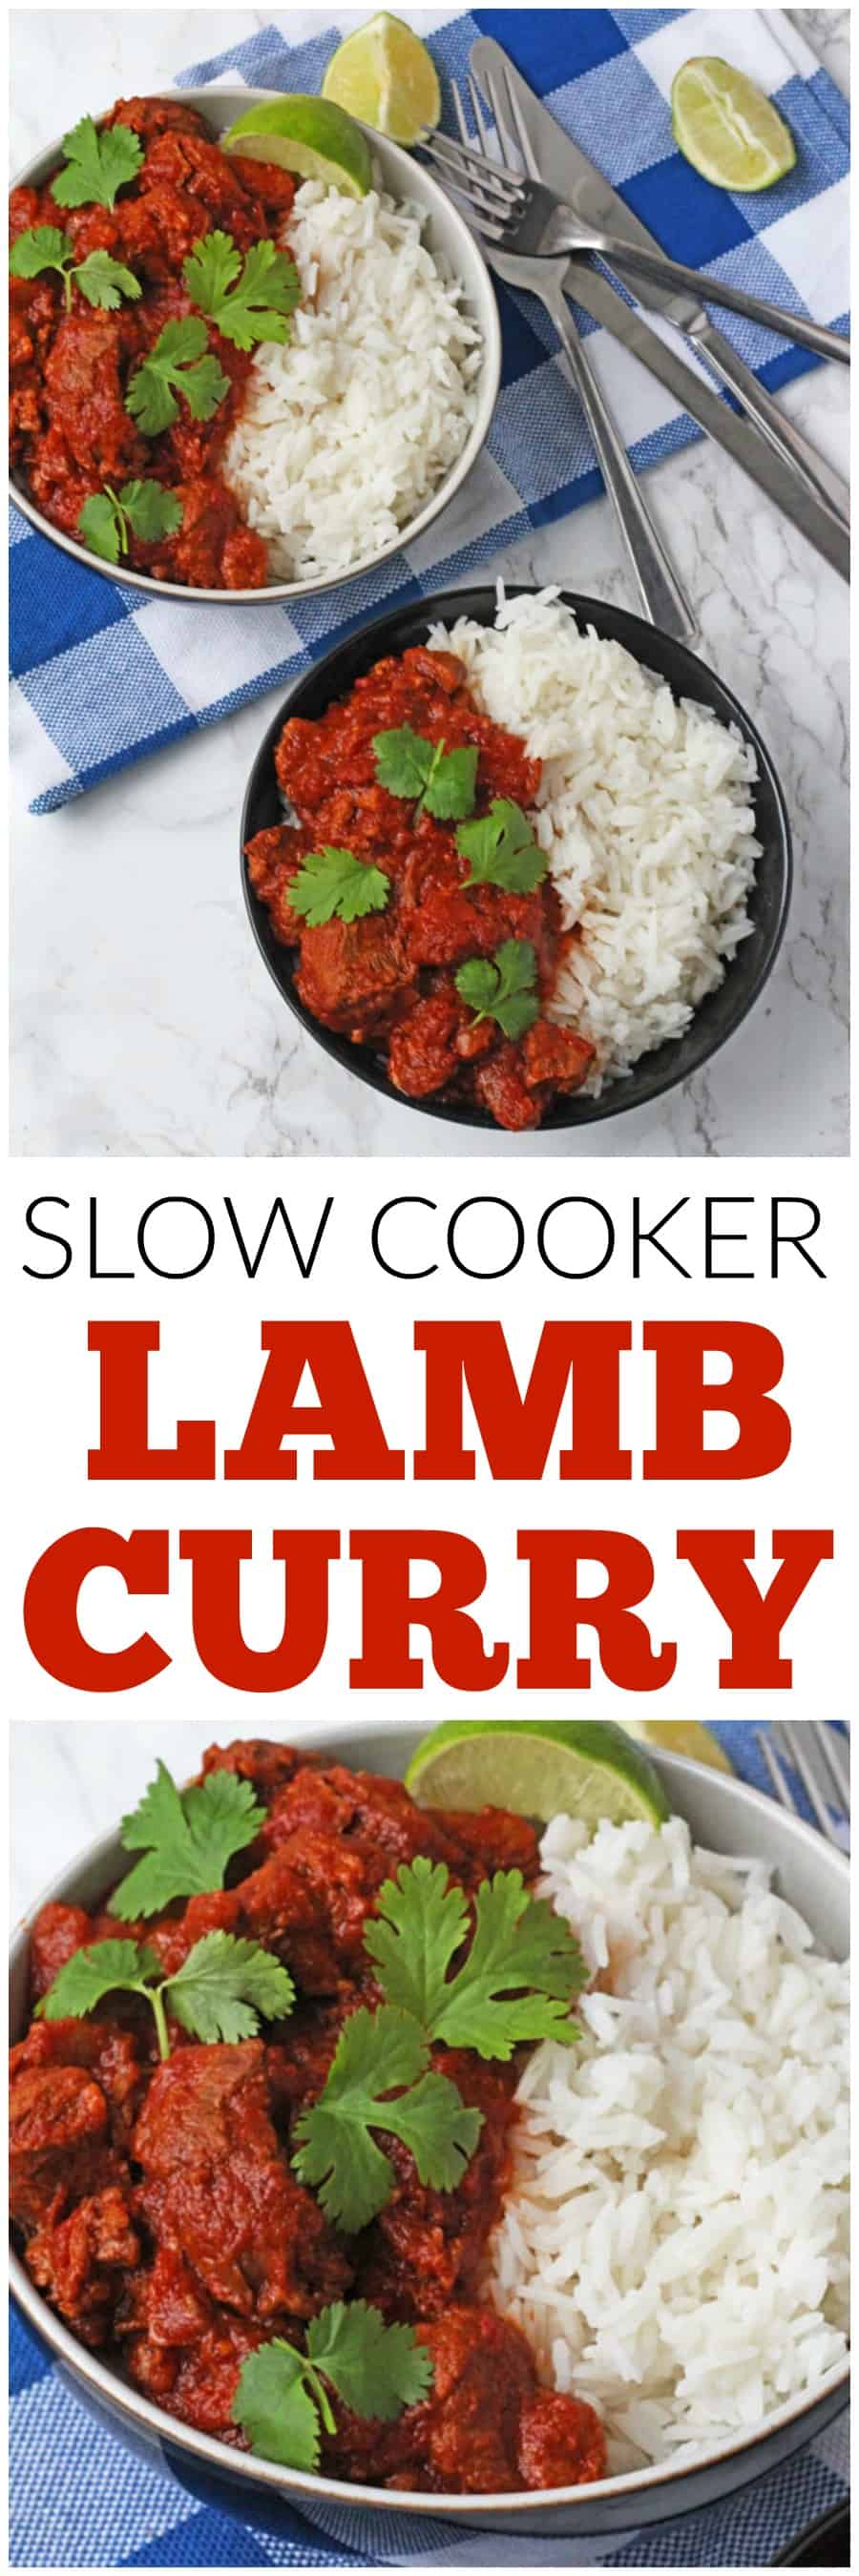 Easy Slow Cooker Lamb Curry - My Fussy Eater | Easy Family Recipes